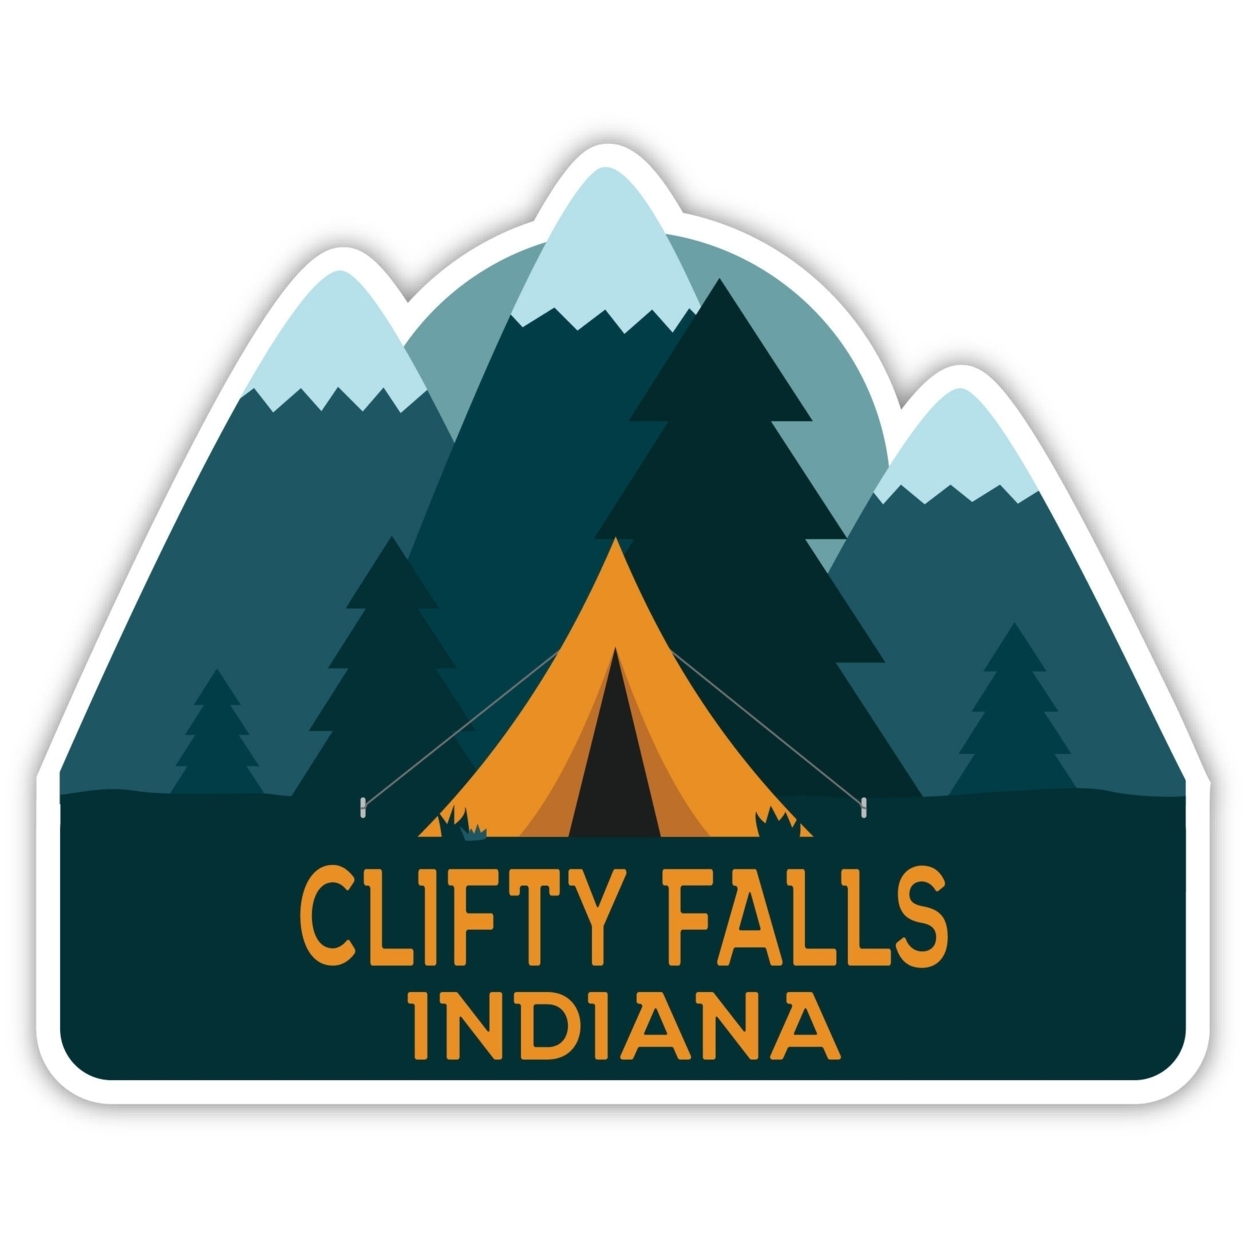 Clifty Falls Indiana Souvenir Decorative Stickers (Choose Theme And Size) - 4-Pack, 12-Inch, Tent